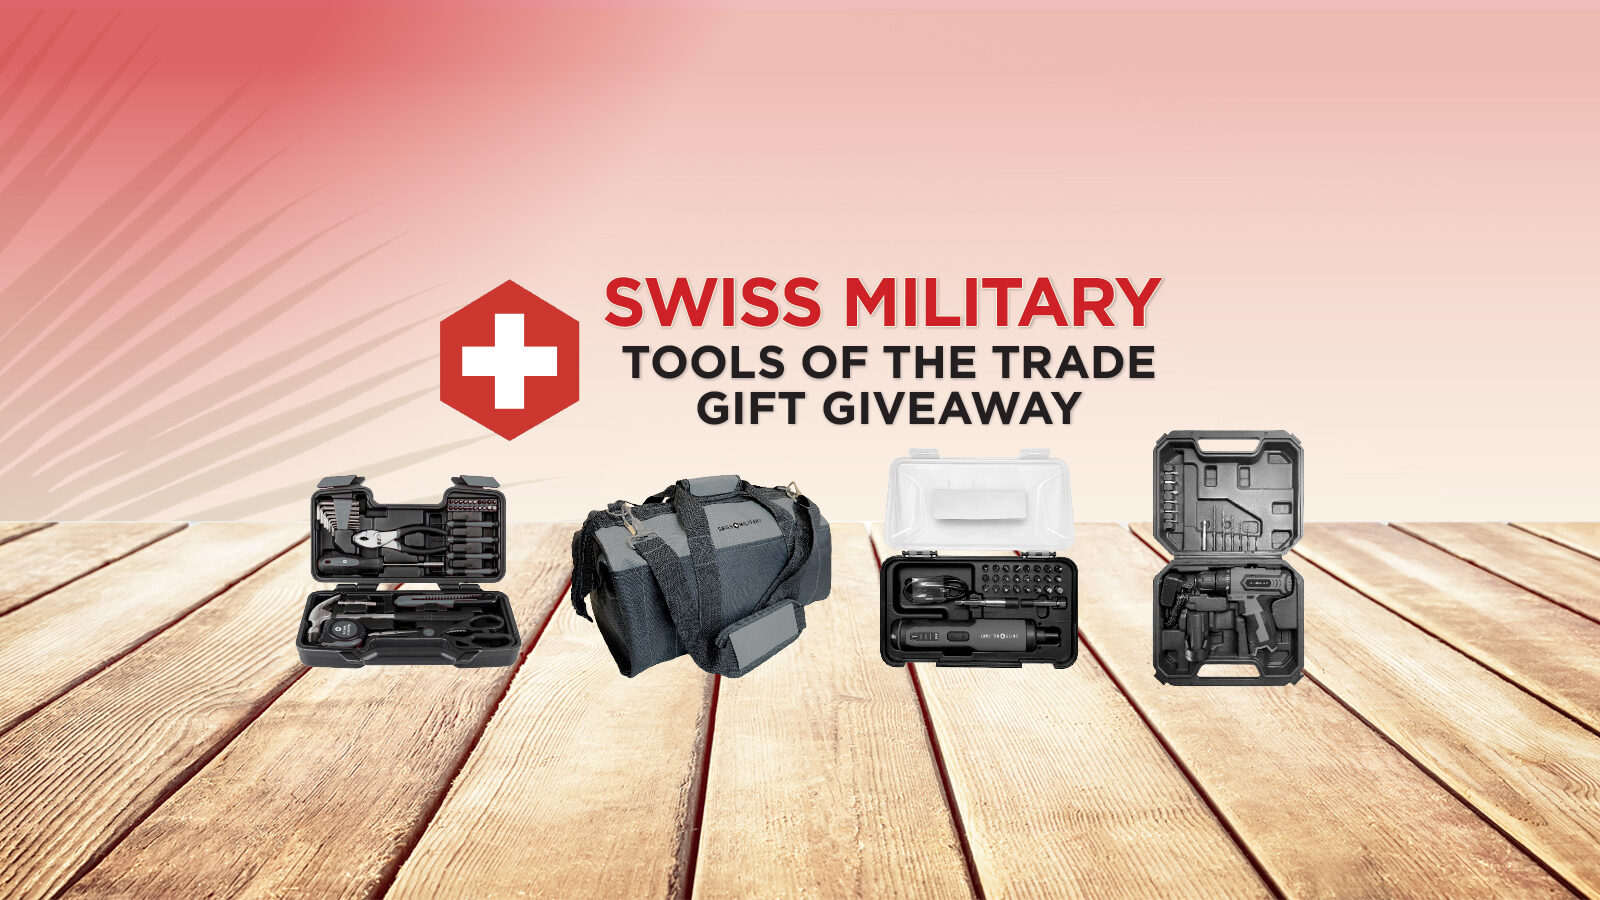 Swiss Military Tools of the Trade Gift Giveaway